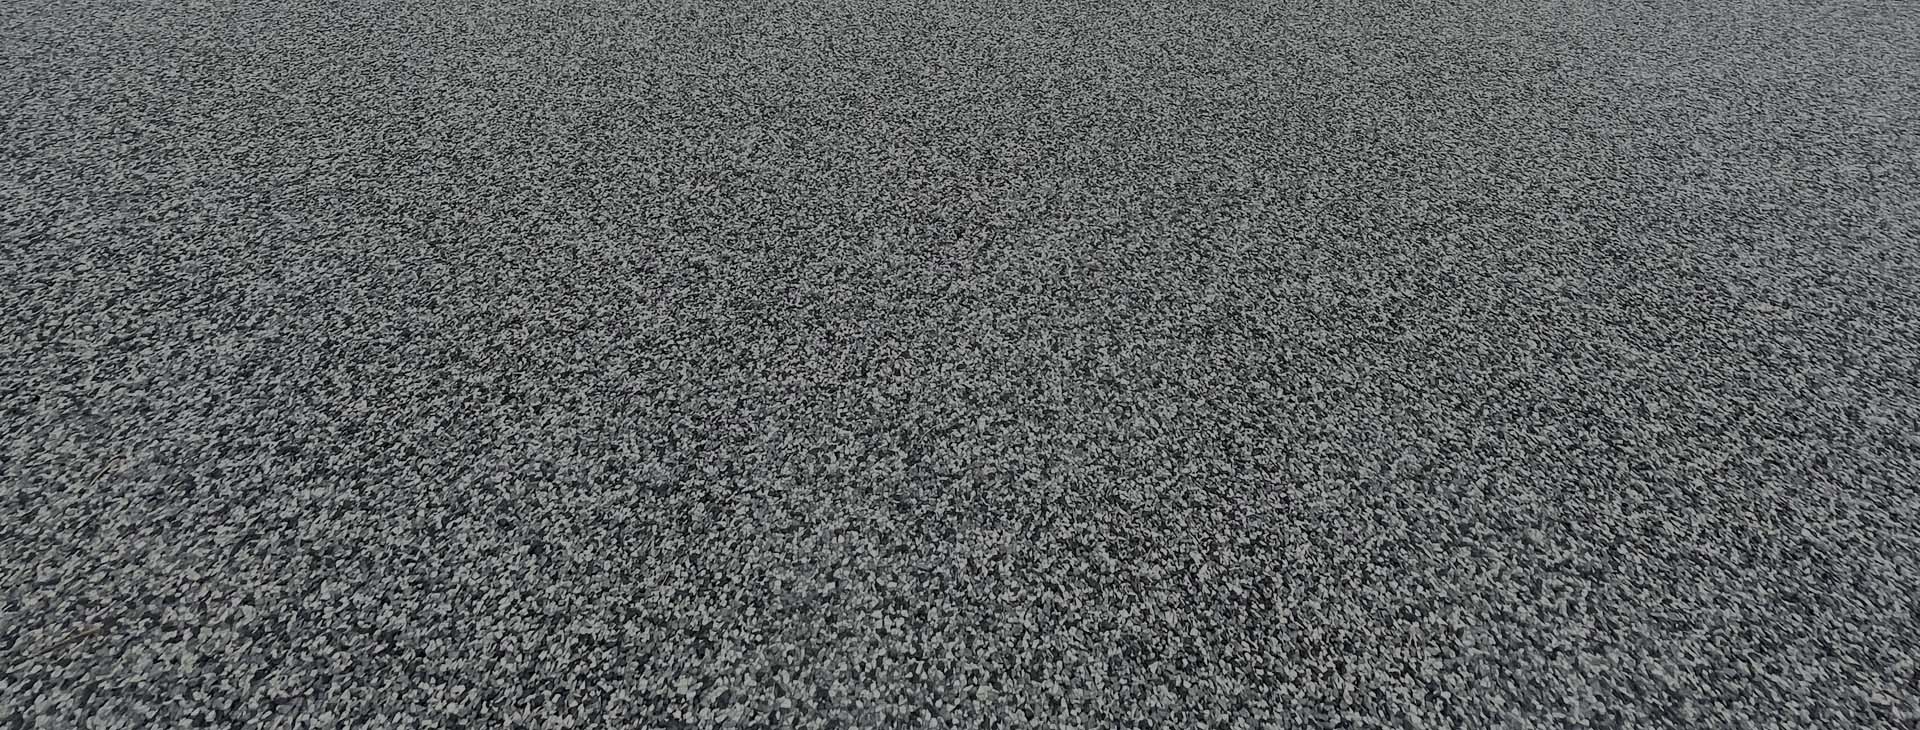 EPDM Rubber Paving and Resurfacing - Wise Guys Rubber Paving